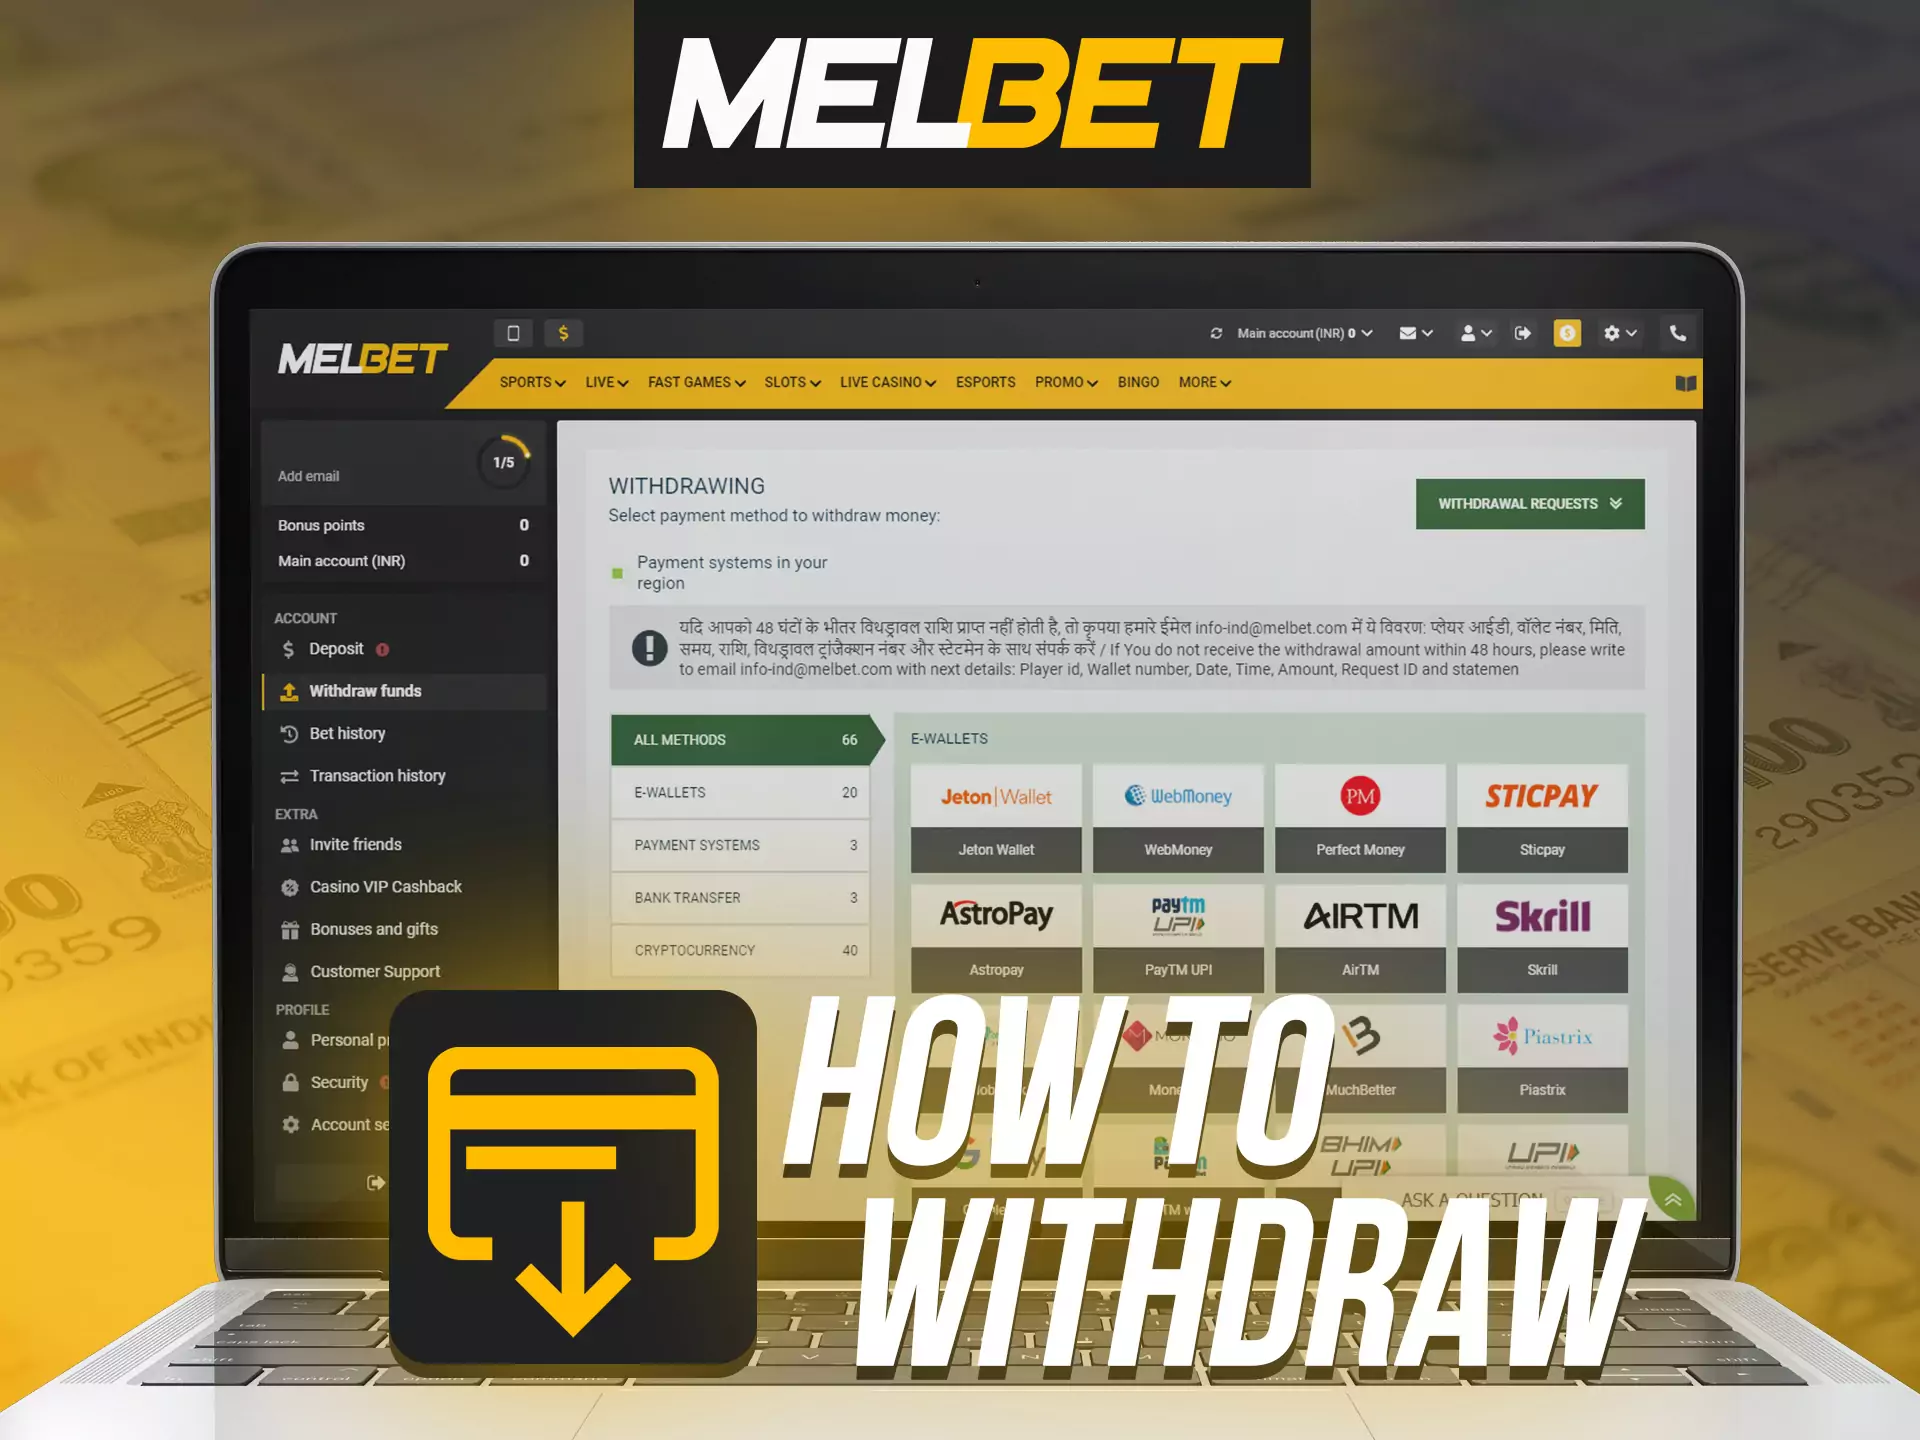 Withdraw money easily with Melbet.